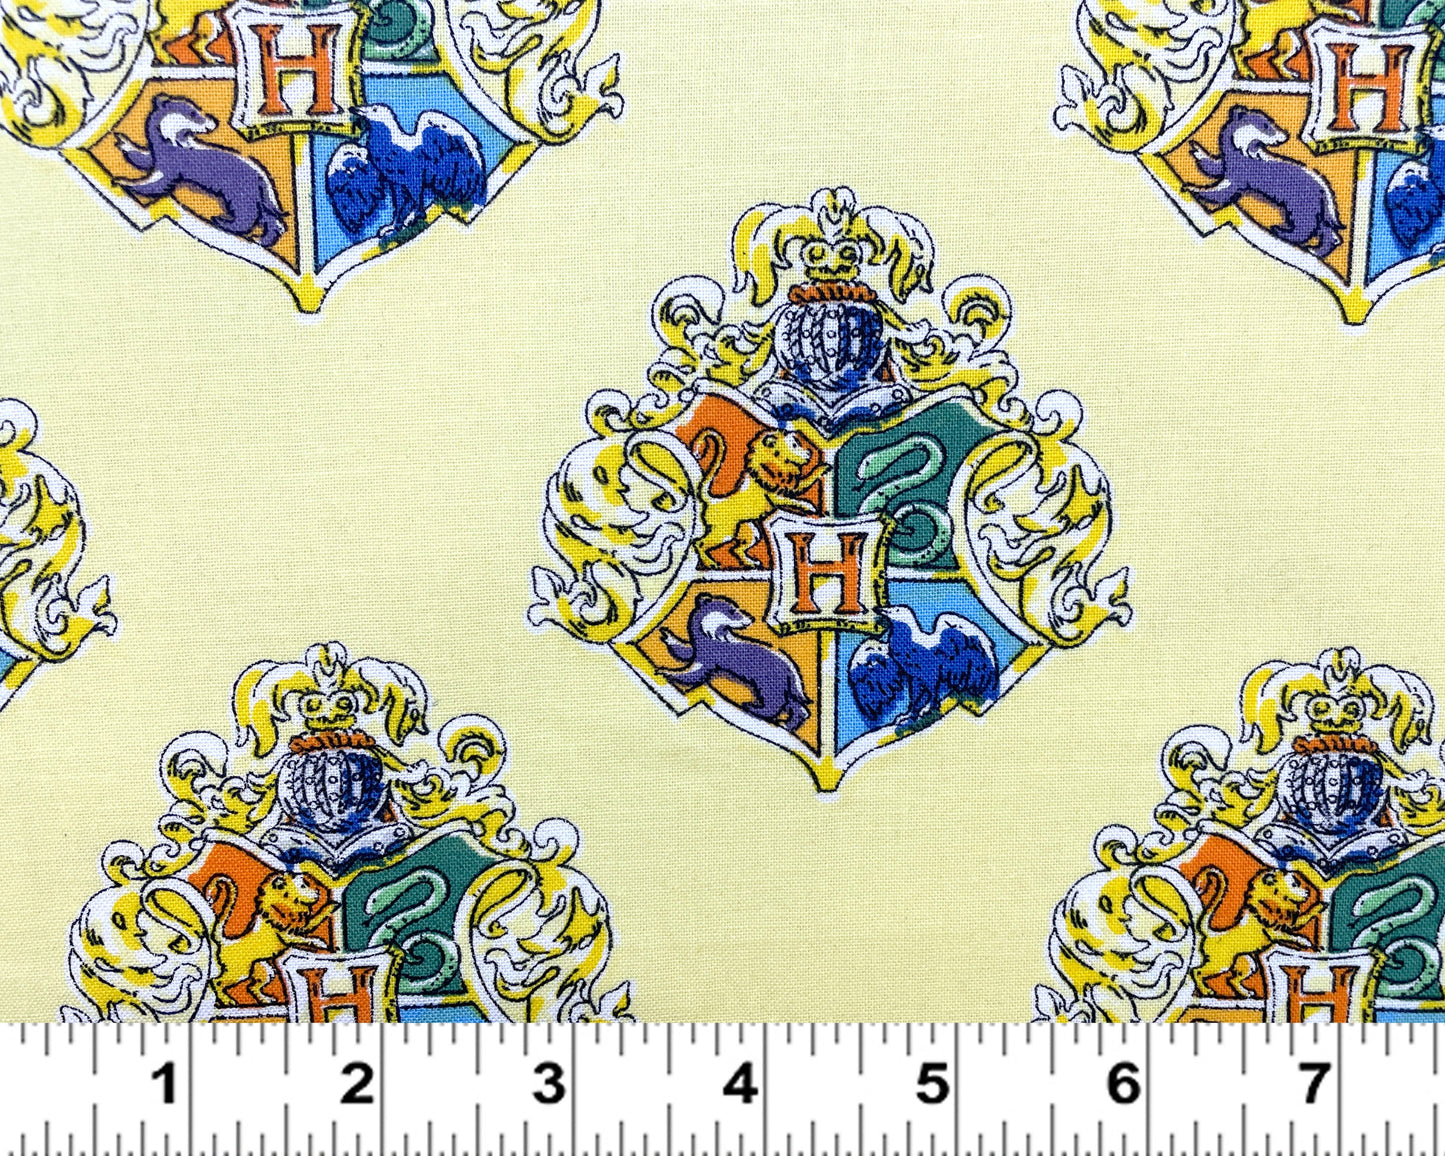 Harry Potter Fabric - Crest in Yellow - 100% cotton fabric by Camelot Fabrics - Logos Wizards Sewing Quilting - SHIPS NEXT DAY